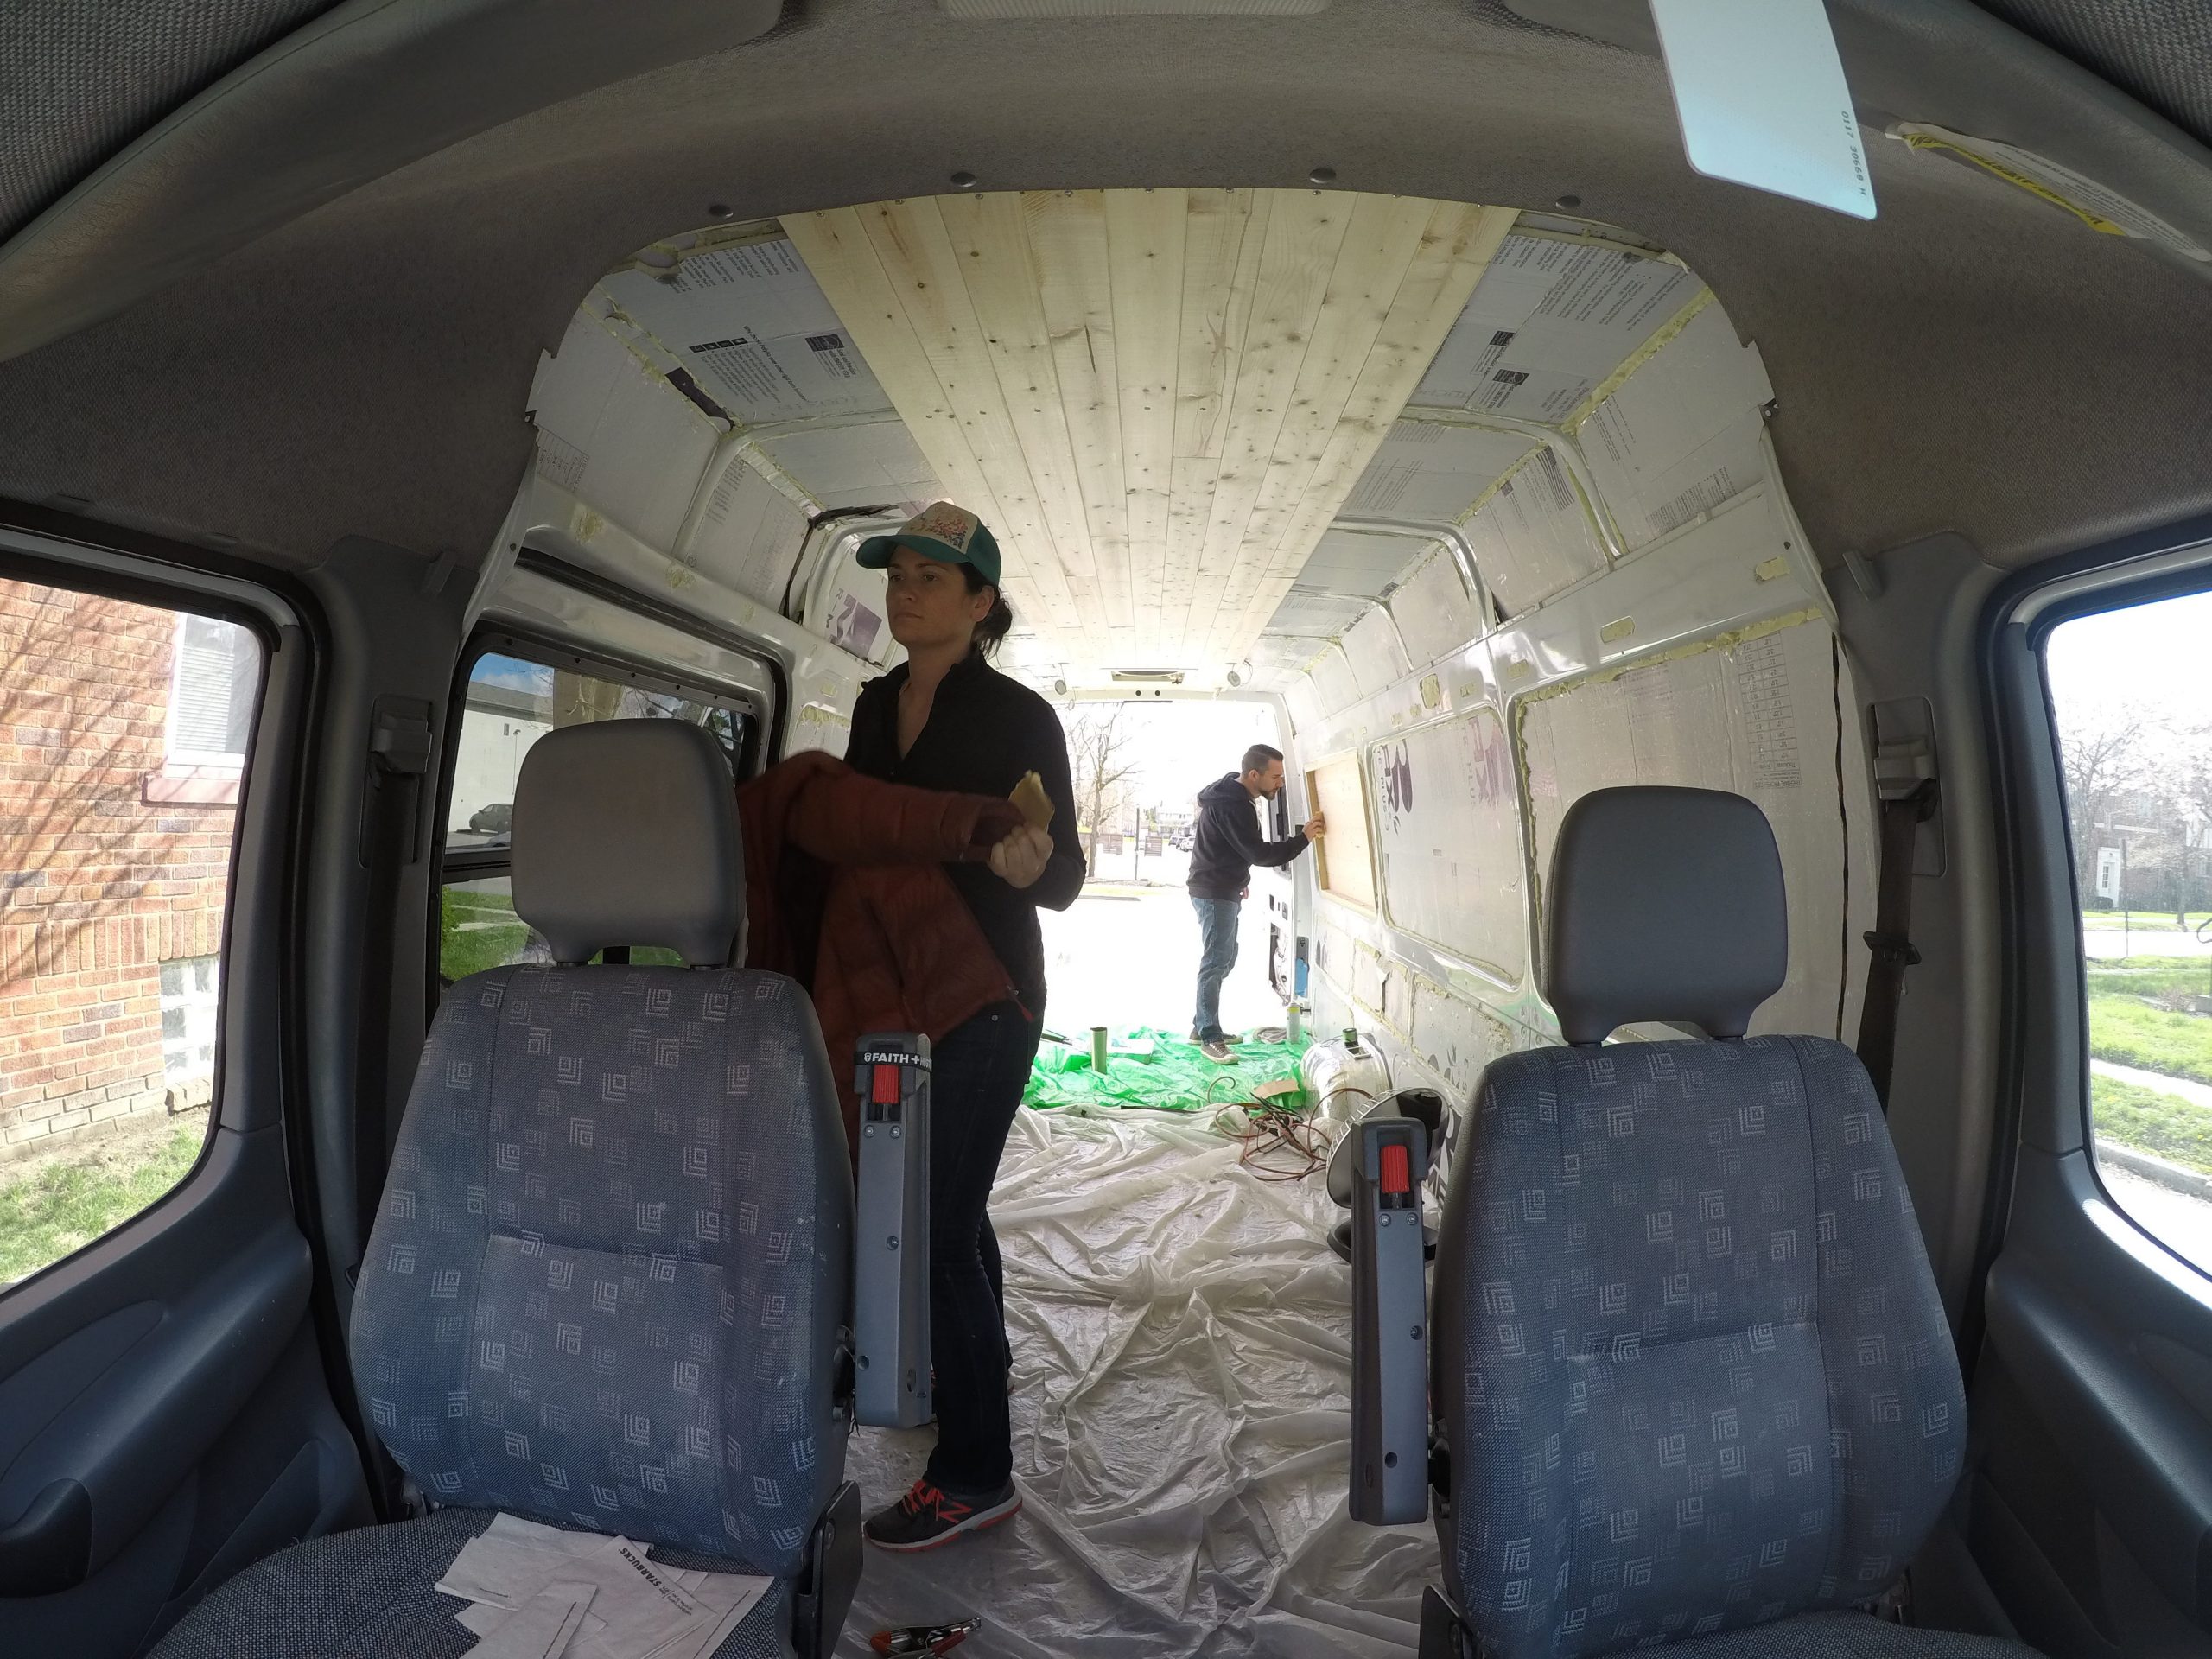 Two people work on converting a van into a camper